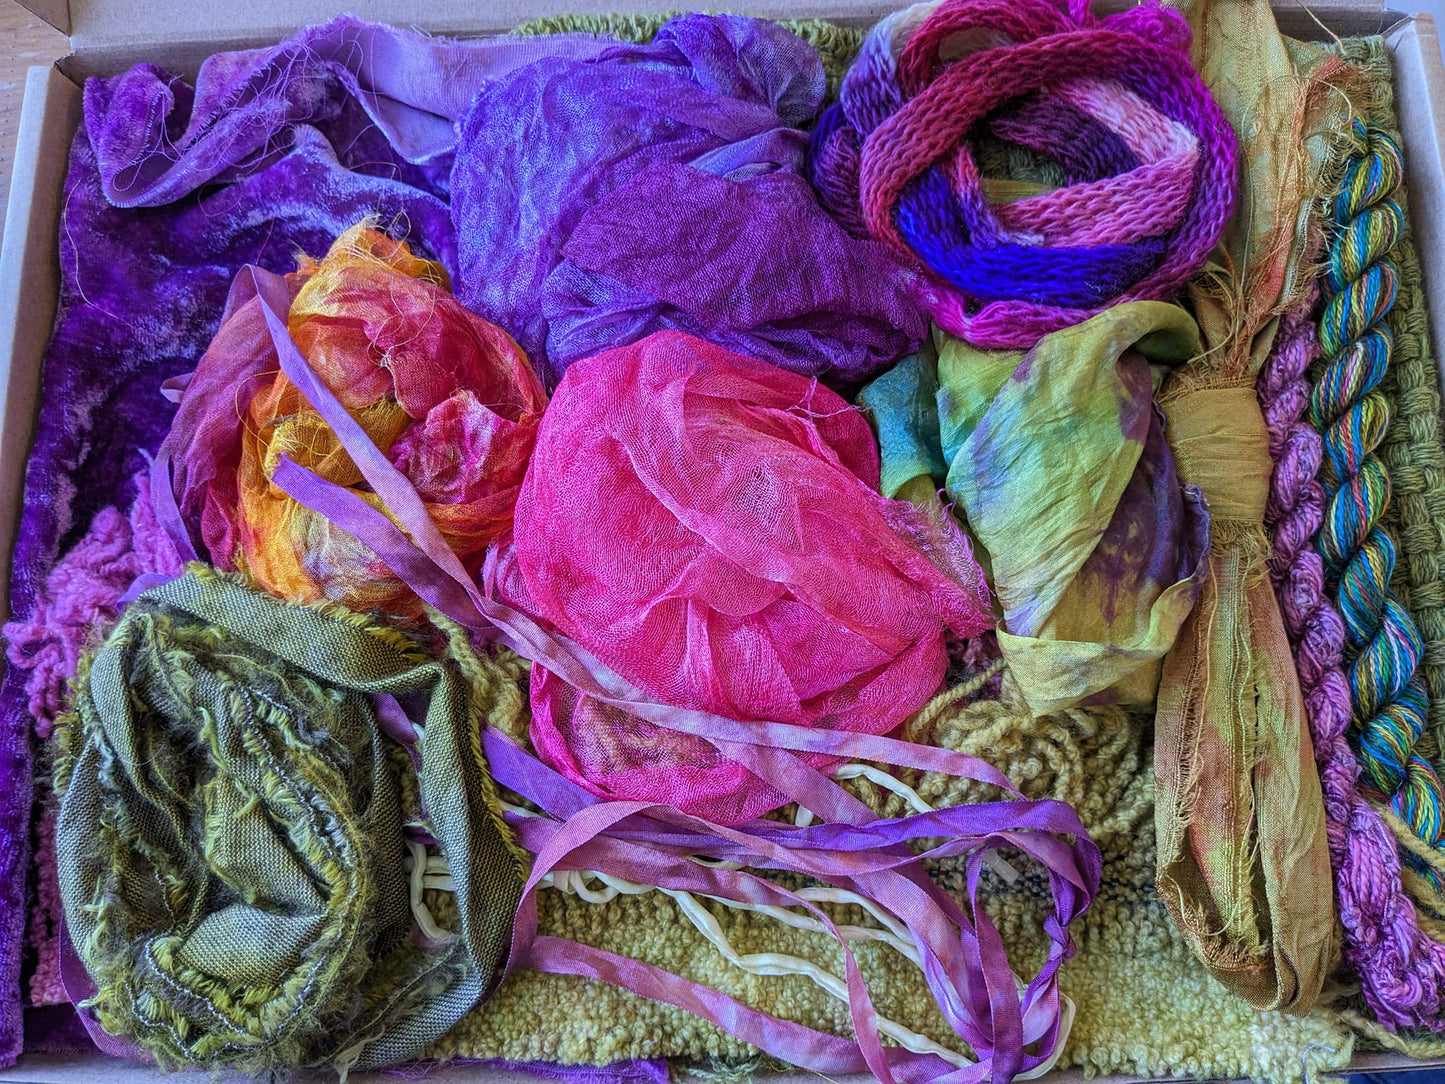 Deposit Workshop - Dyeing in a microwave - Friday 30th Aug